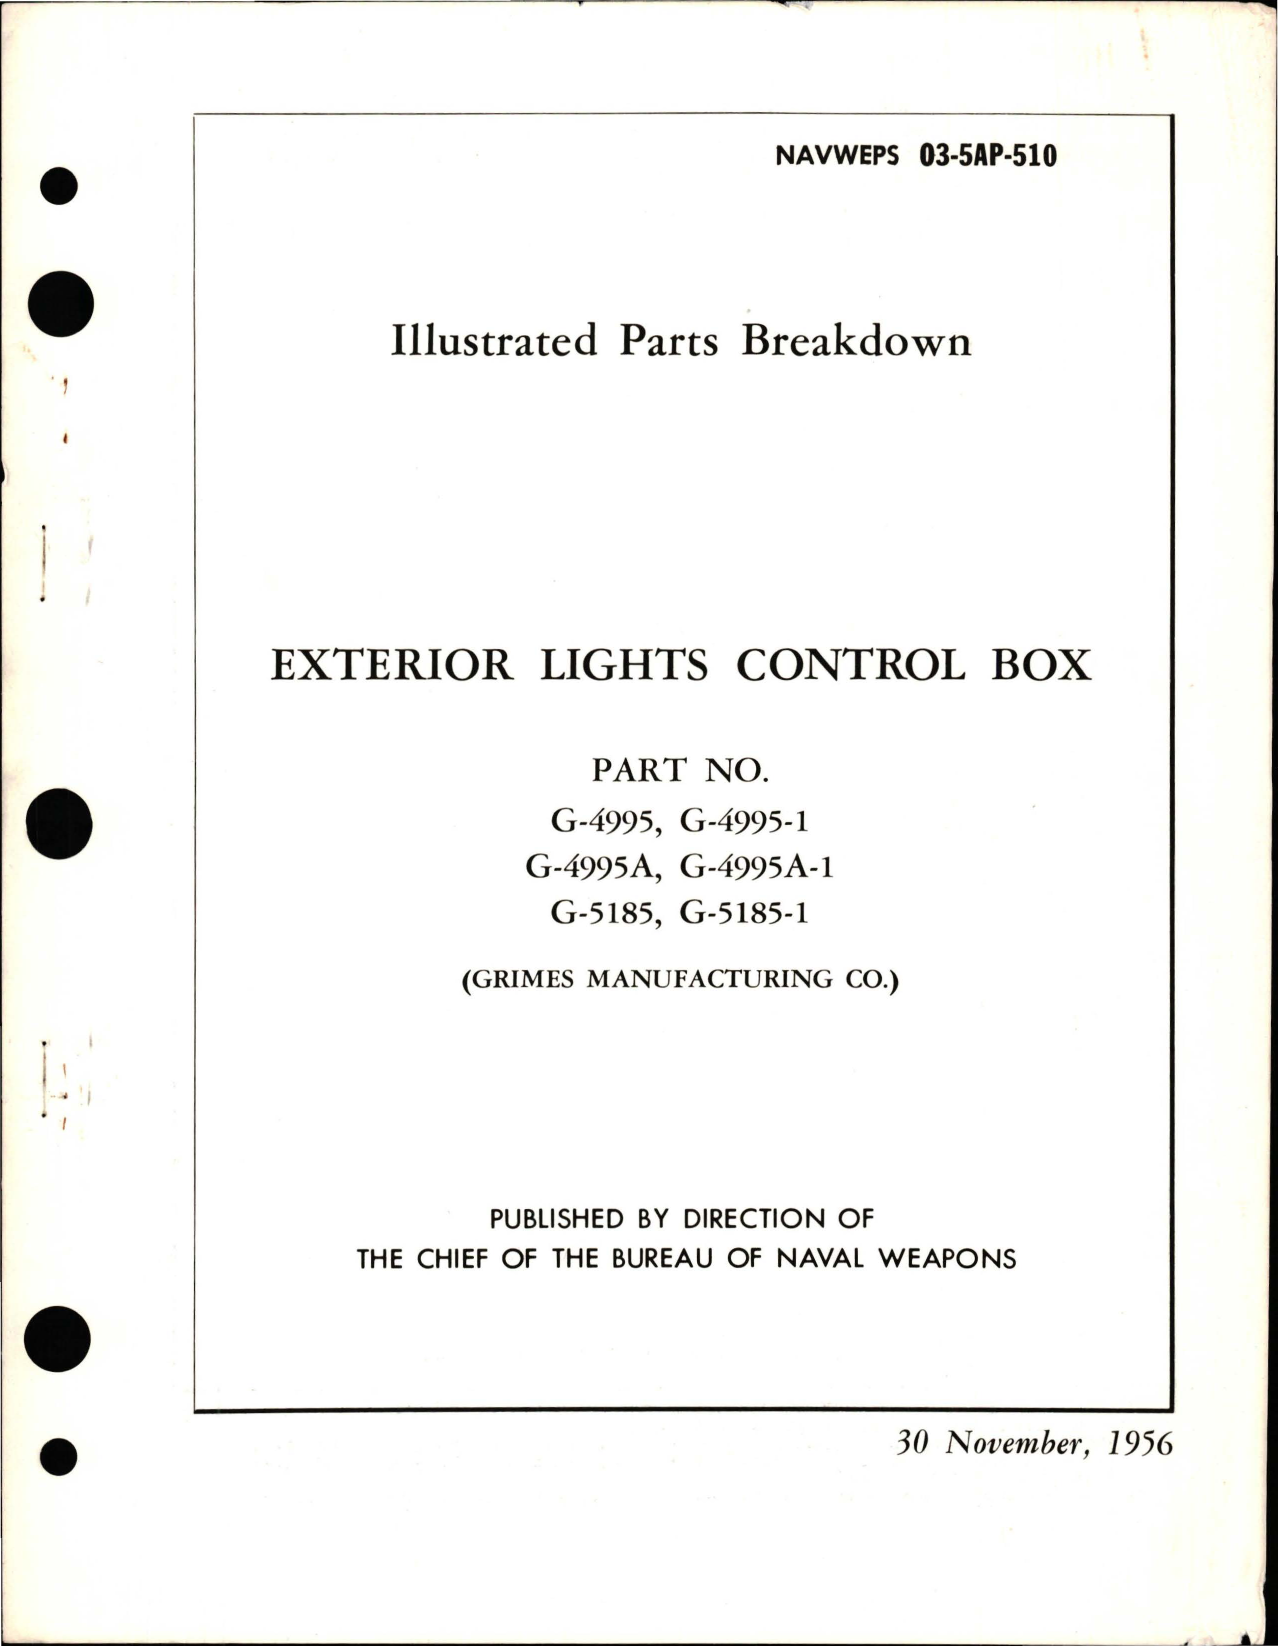 Sample page 1 from AirCorps Library document: Illustrated Parts Breakdown for Exterior Lights Control Box - Parts G-4995, G-4995-1, G-4995A, G-4995A-1, G-5185, and G-5185-1